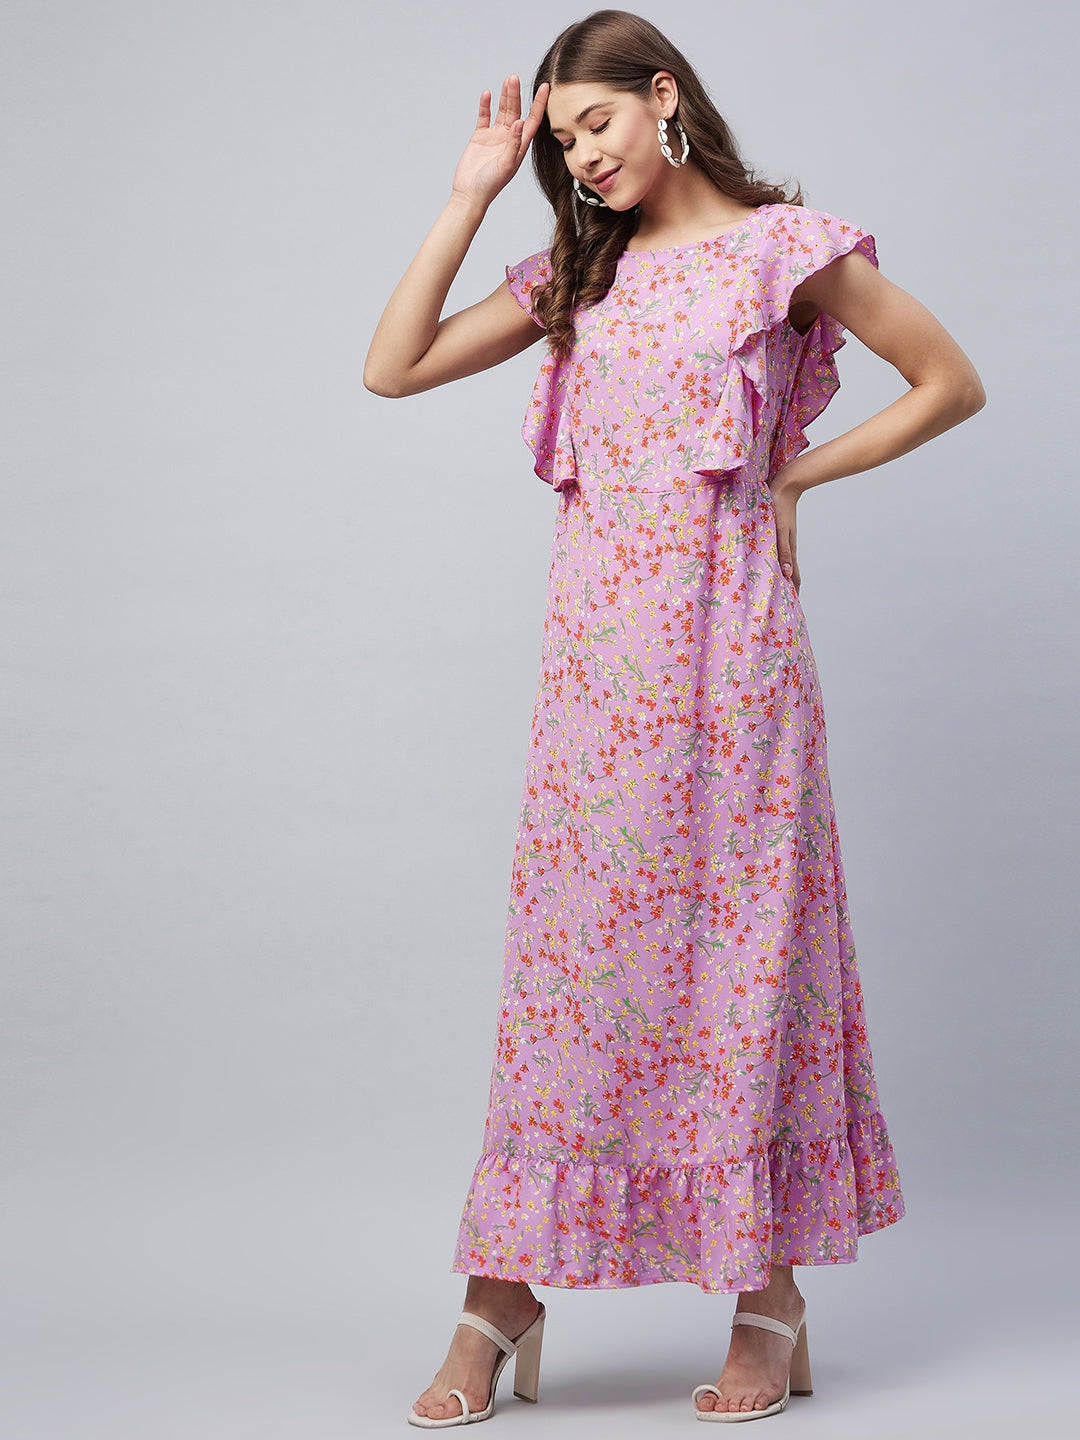 Women's Lavender Floral Maxi Dress with Flutter Sleeves